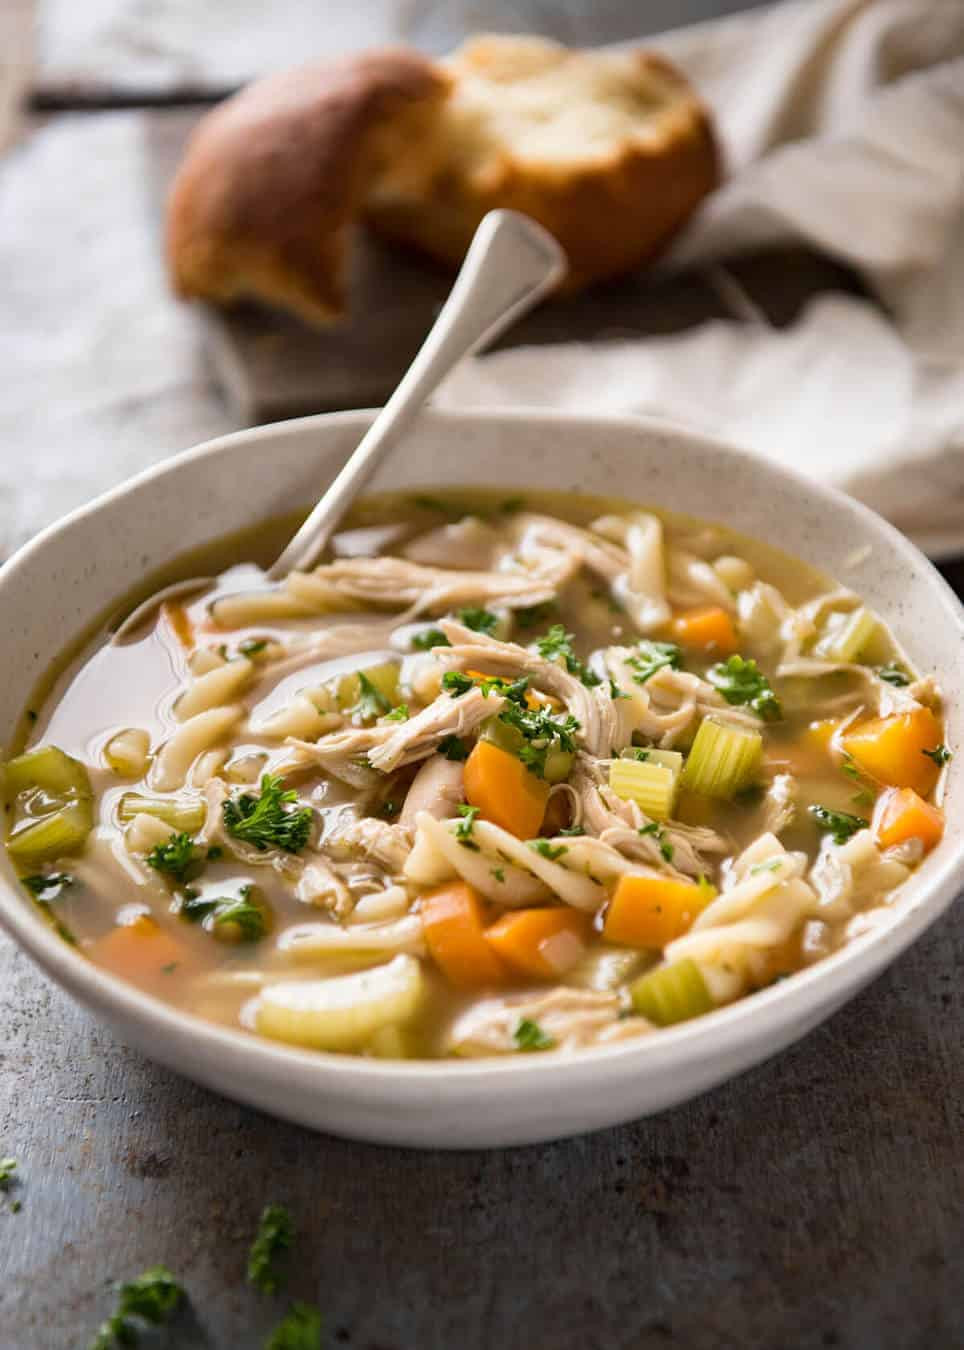 Make Chicken Noodle Soup
 Homemade Chicken Noodle Soup From Scratch